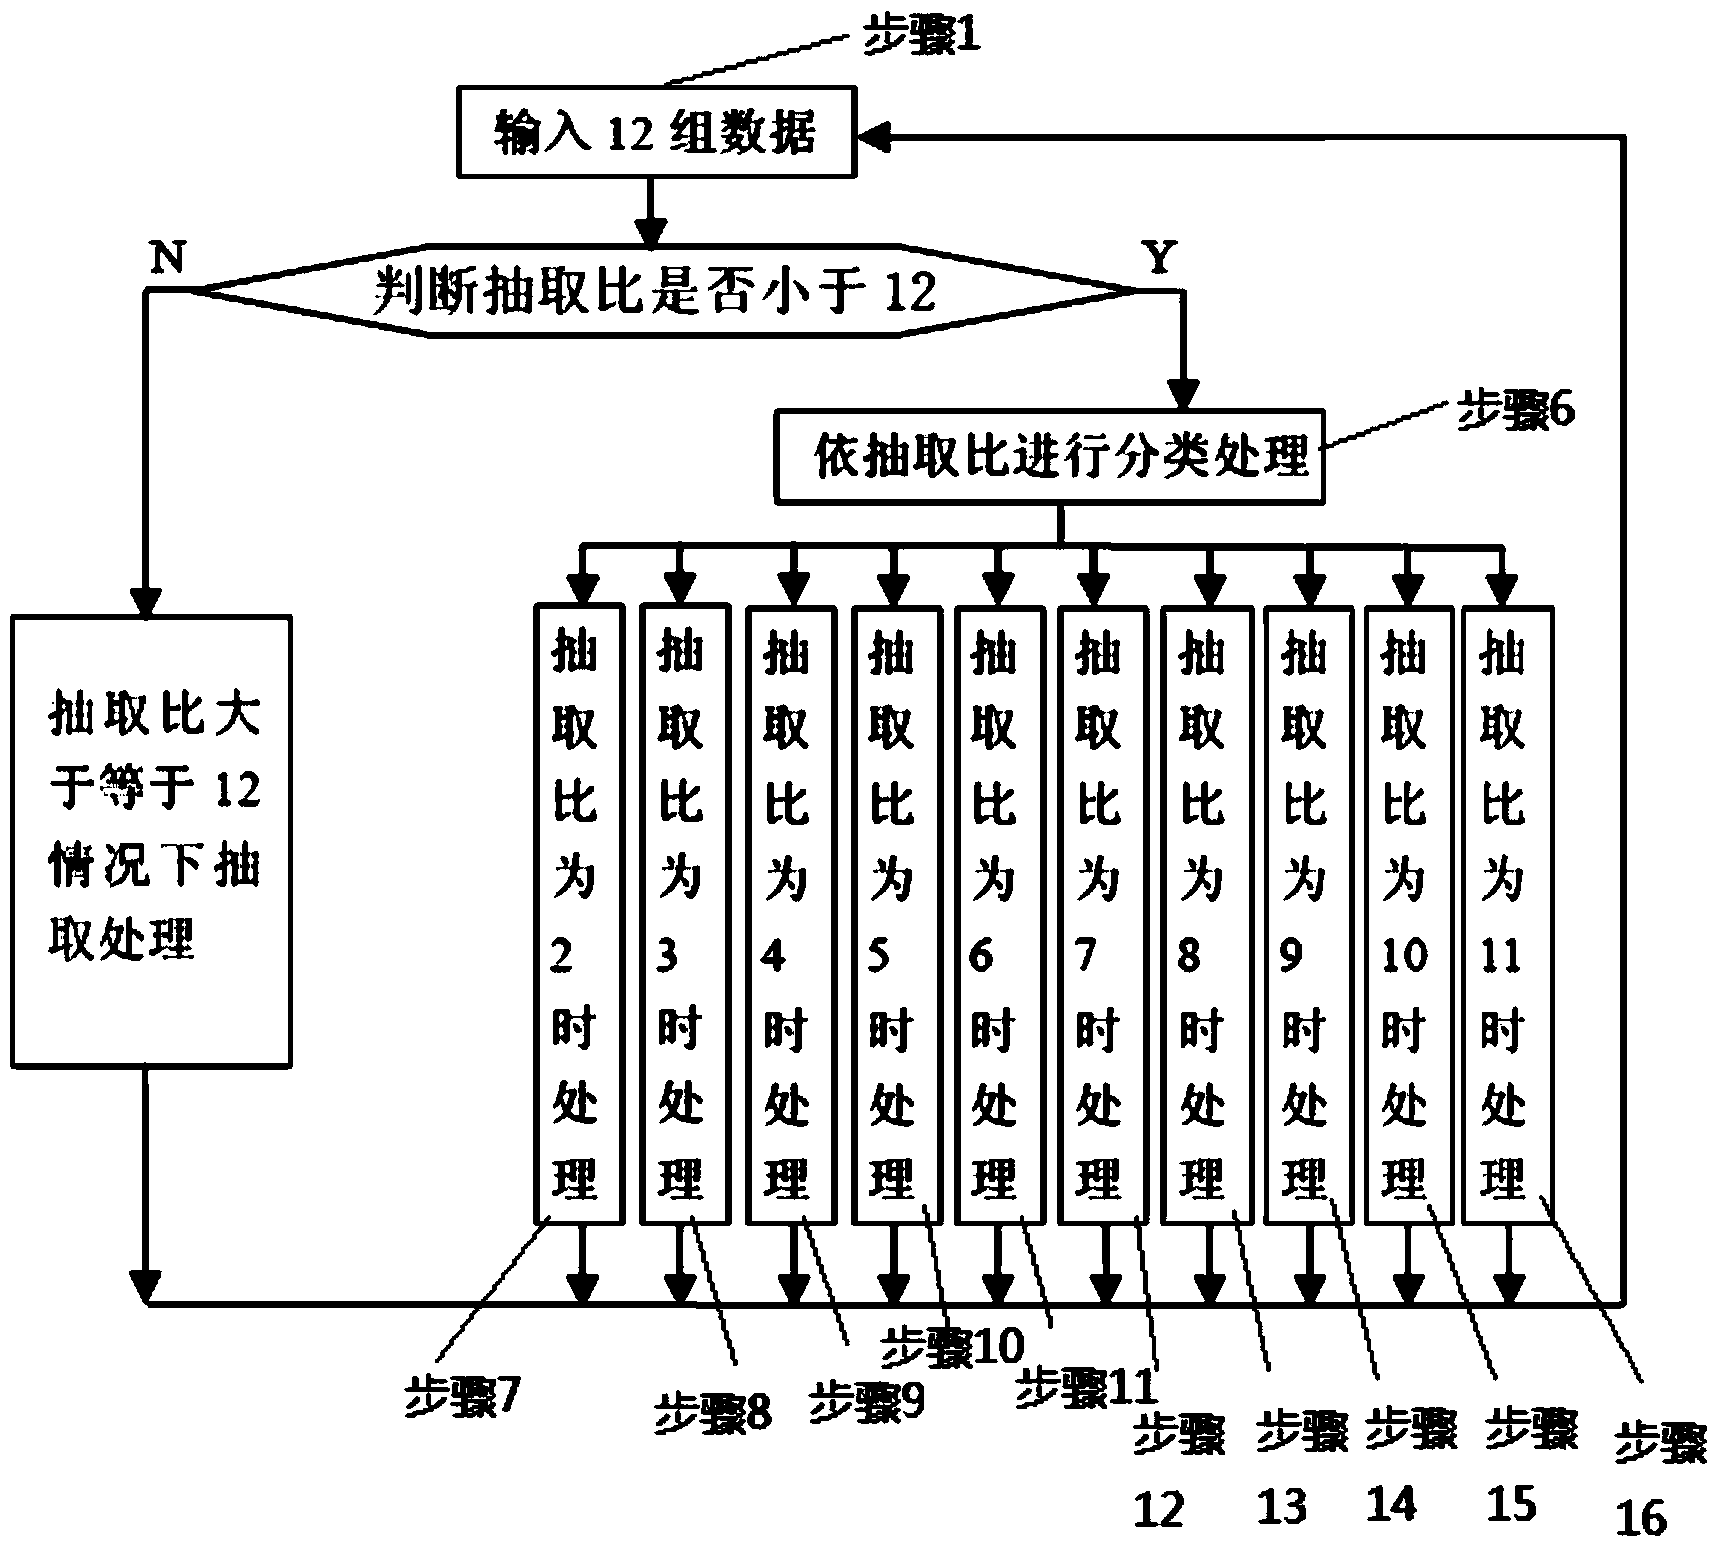 High-speed data extracting method achieving input and output arranged in sequence based on FPGA